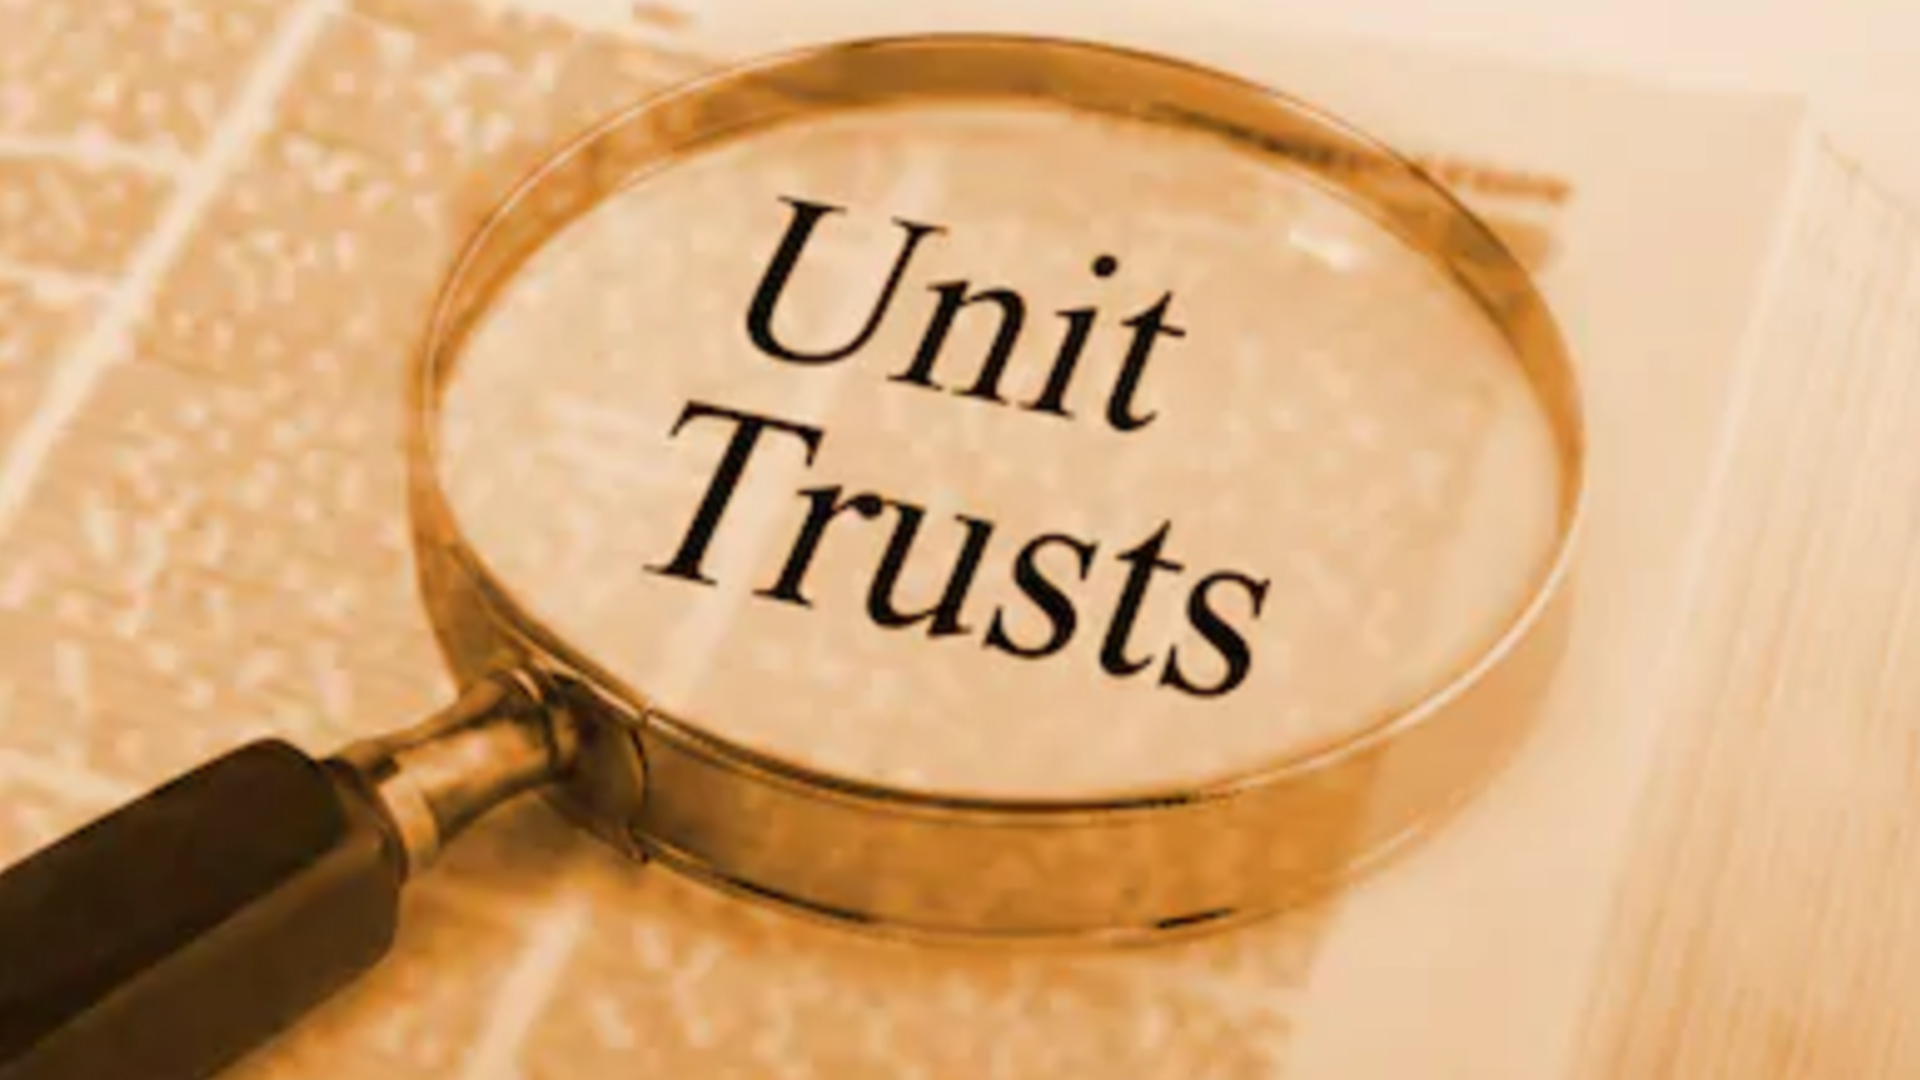 thesis unit trust management operate